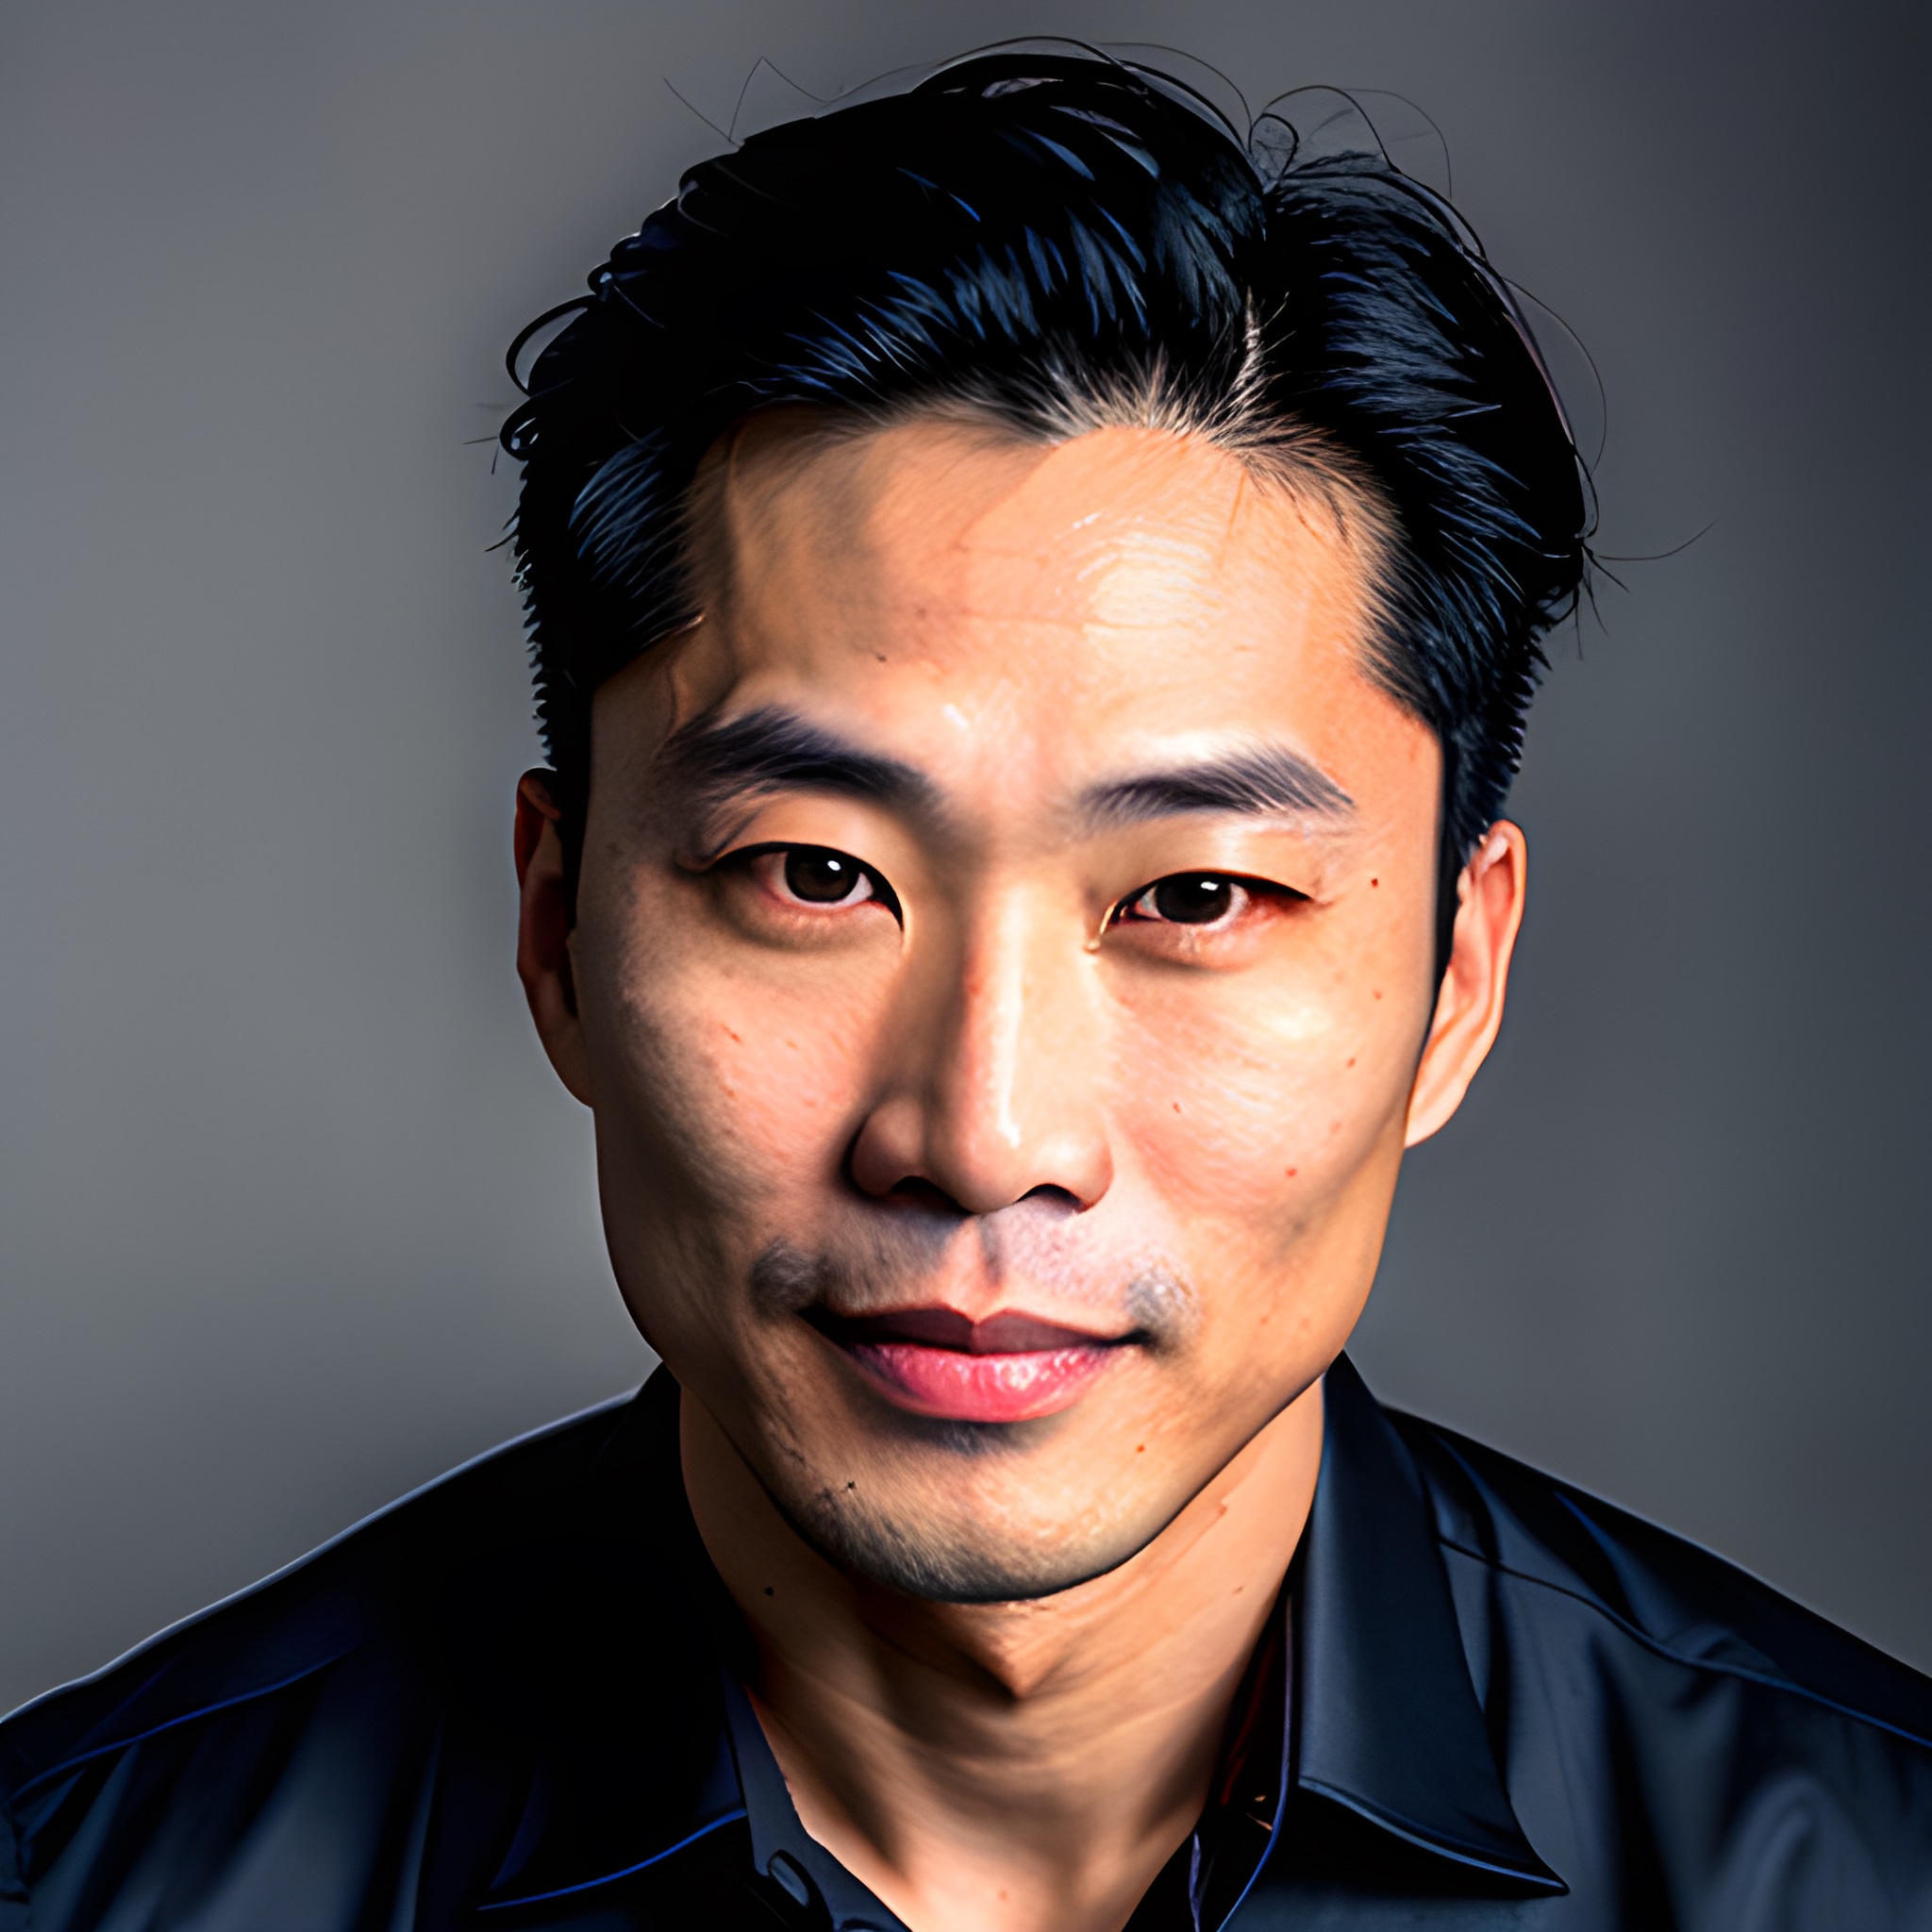 Dr. Kevin Chen